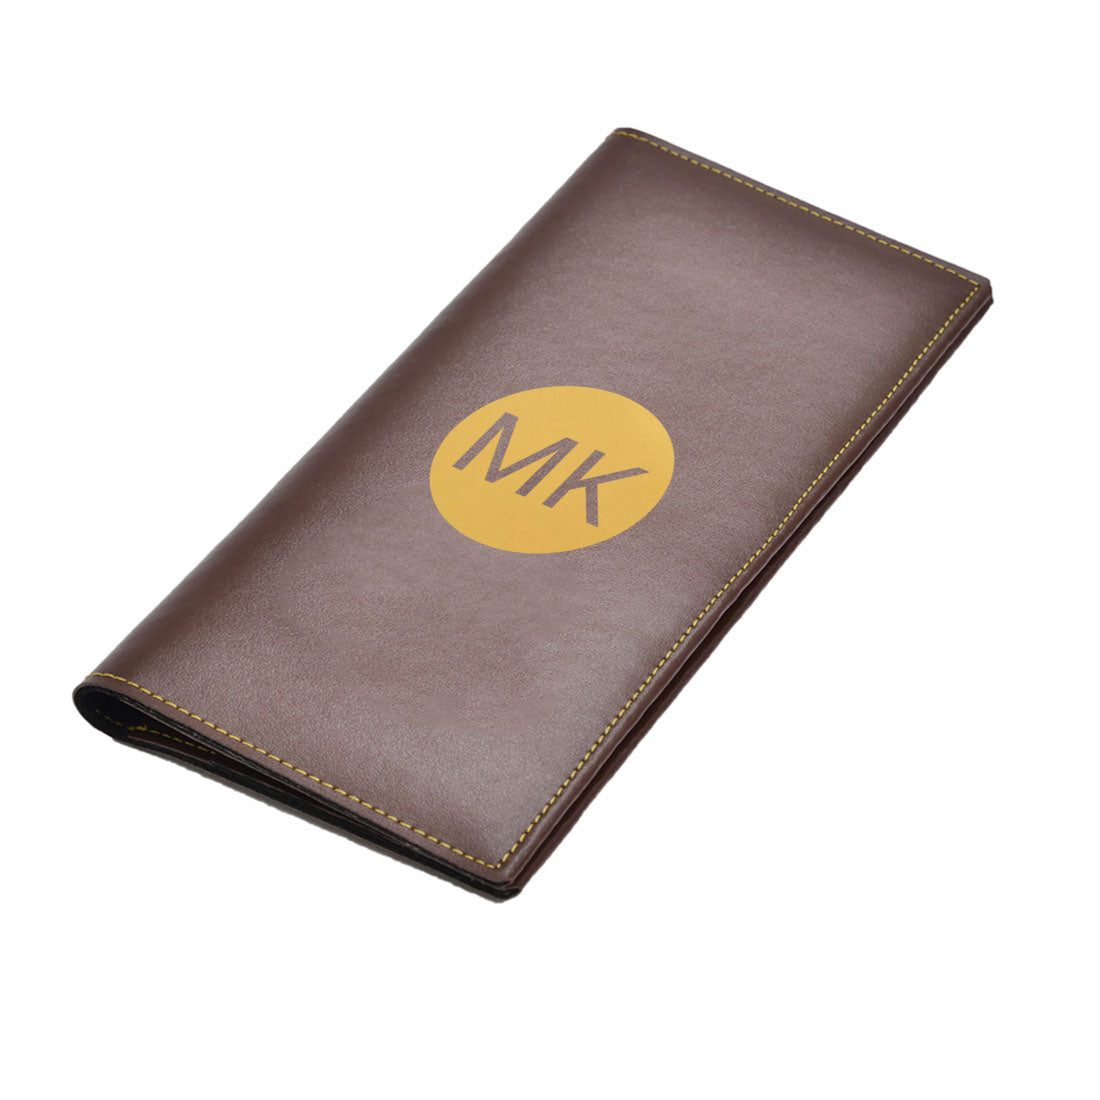 Leather Passport Wallet Case Personalised Travel Organizer - Circle Initials